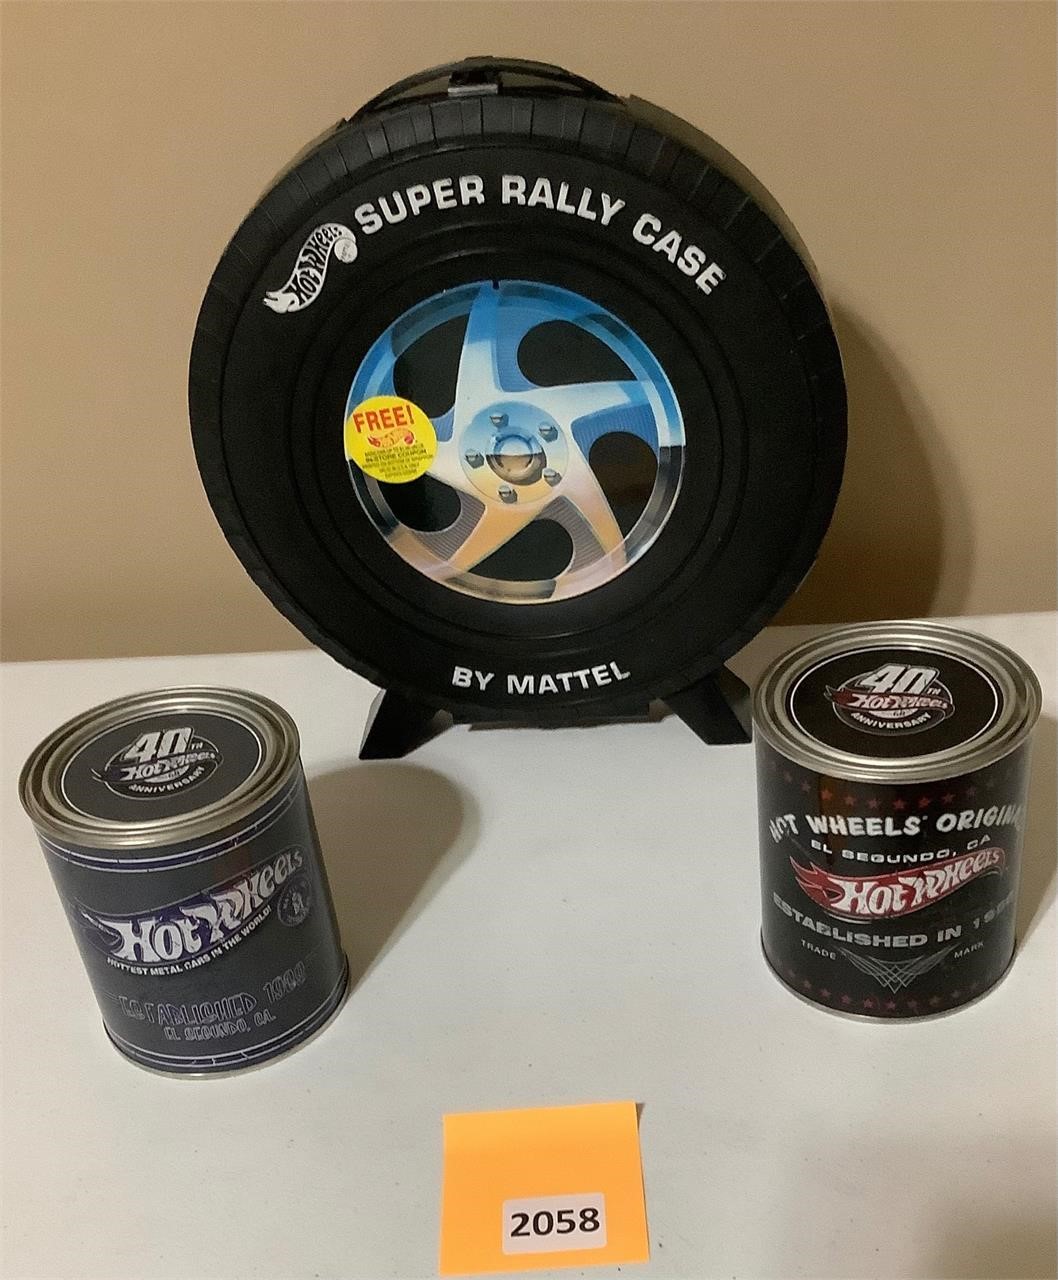 Car Case and Oil Cans